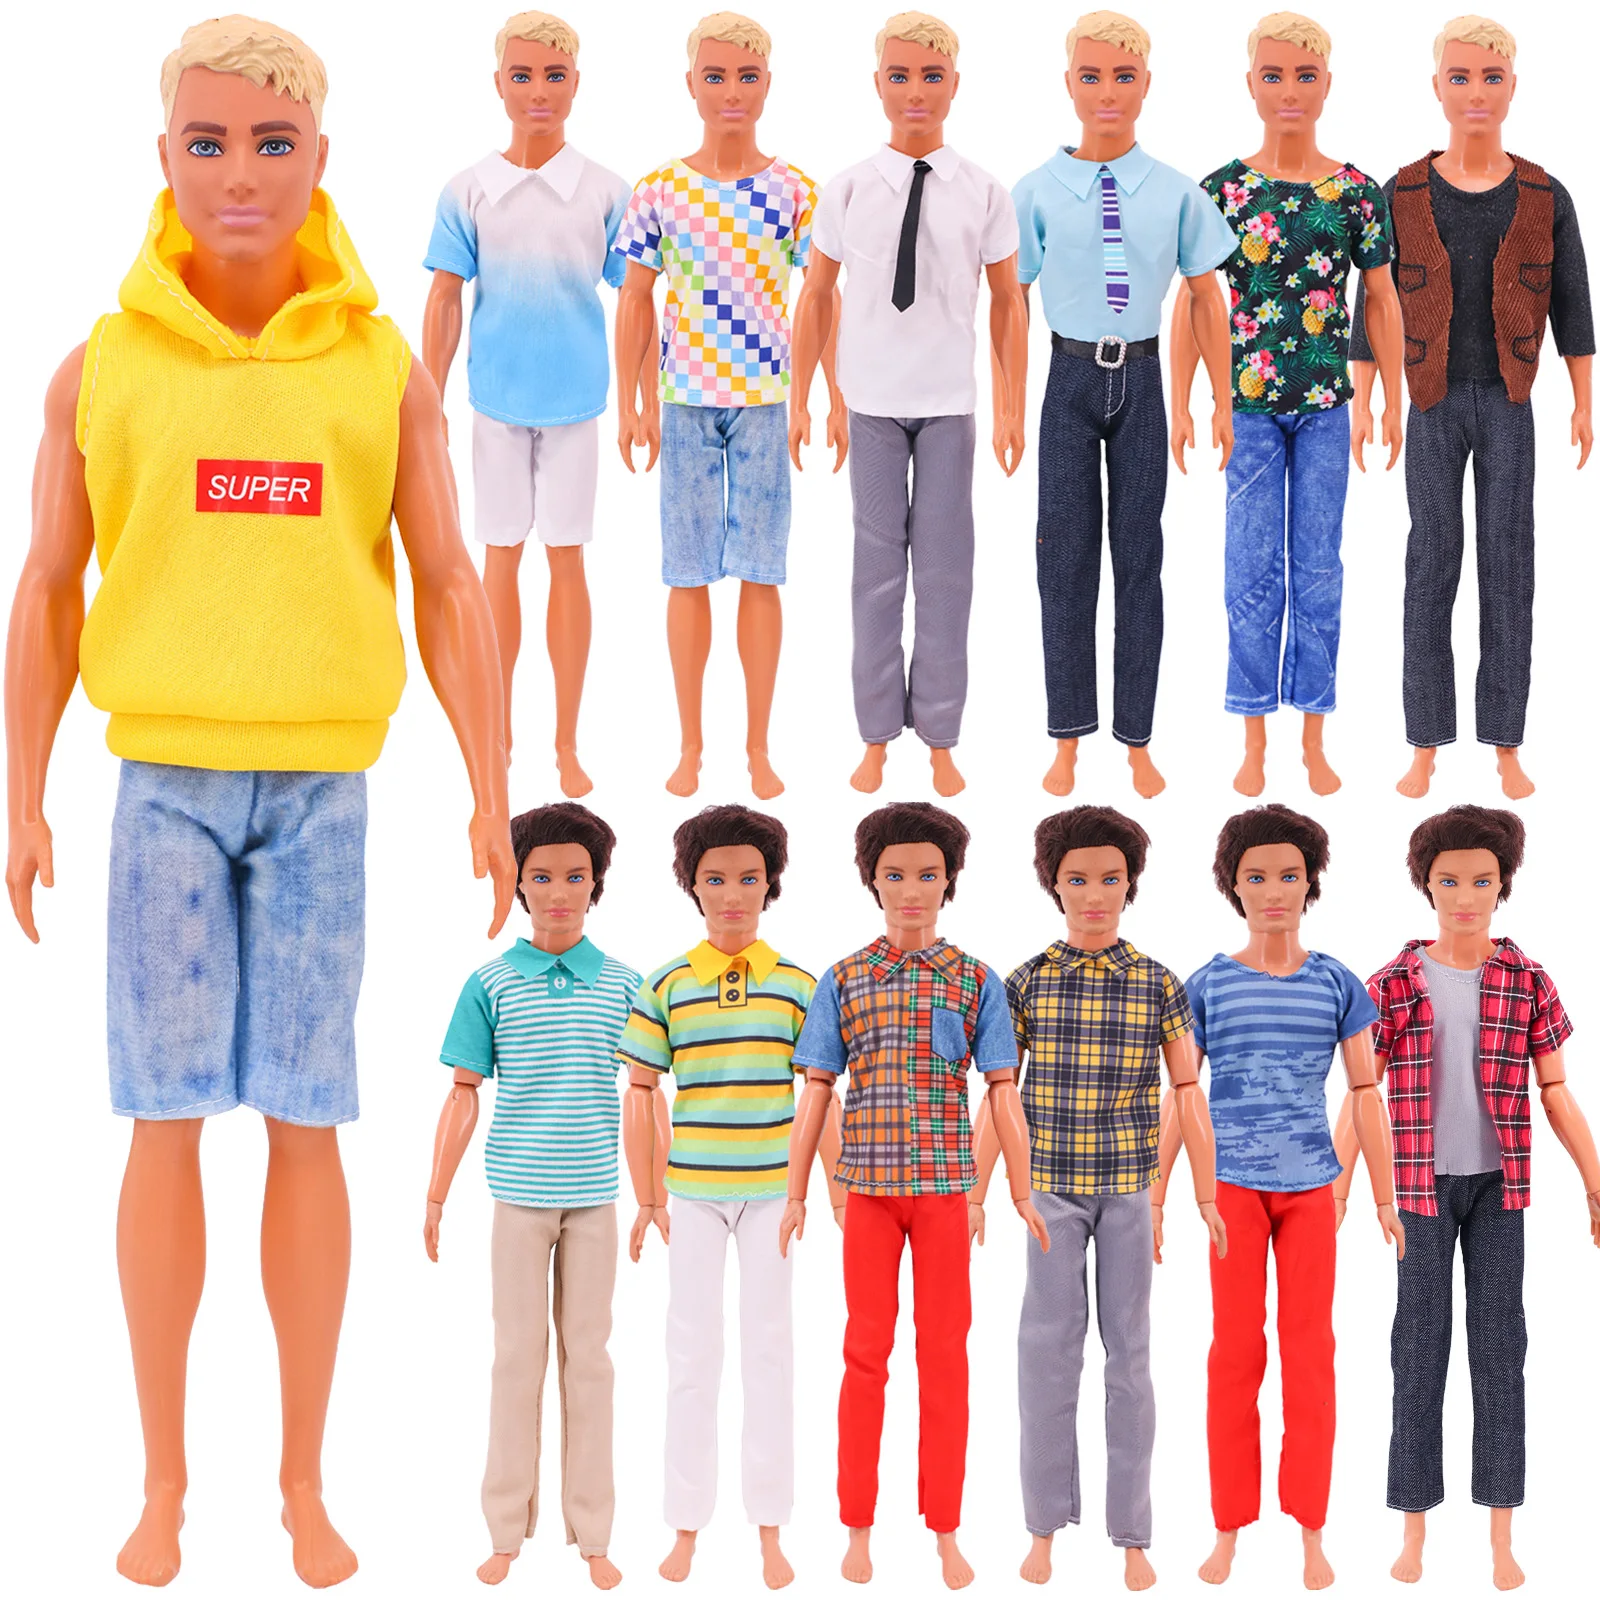 Ken Boy Doll Clothes Handmade Hoodie Shirt Short Sleeve Trousers Fashion Summer New Product For 11.8 Inch Boy Dolls Children Toy soft warm doll clothes doll accessories casual outfit trousers doll plush coat plush jacket 30cm doll winter coat children gift